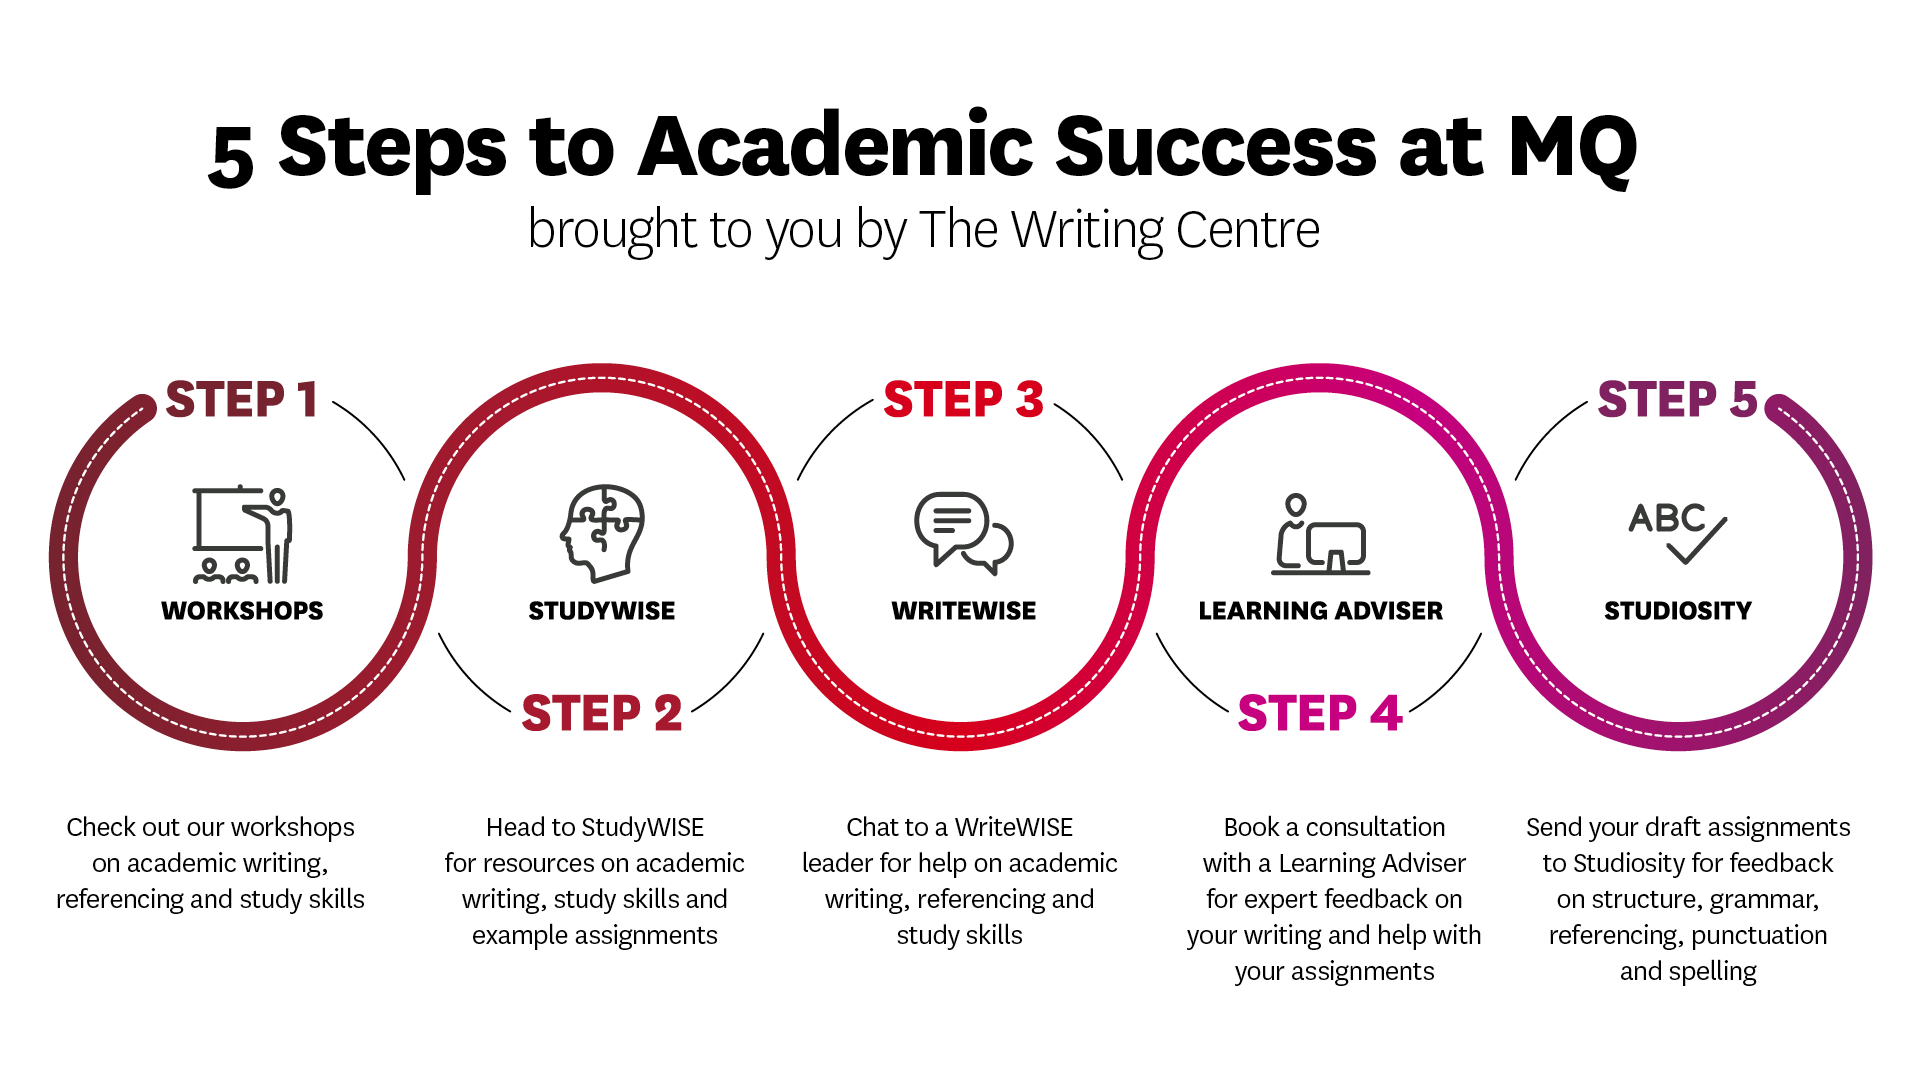 5 Steps to Academic Success at MQ brought to you by The Writing Centre. Step 1: Check out our workshops on academic writing, referencing and study skills. Step 2: Head to StudyWISE for resources on academic writing, study skills and example assignments. Step 3: Chat to a WriteWISE leader for help on academic writing, referencing and study skills. Step 4: Book a consultation with a Learning Advisor for expert feedback on your writing and help with your assignments. Step 5: Send your draft assignments to Studiosity for feedback on structure, grammar, referencing, punctuation and spelling.